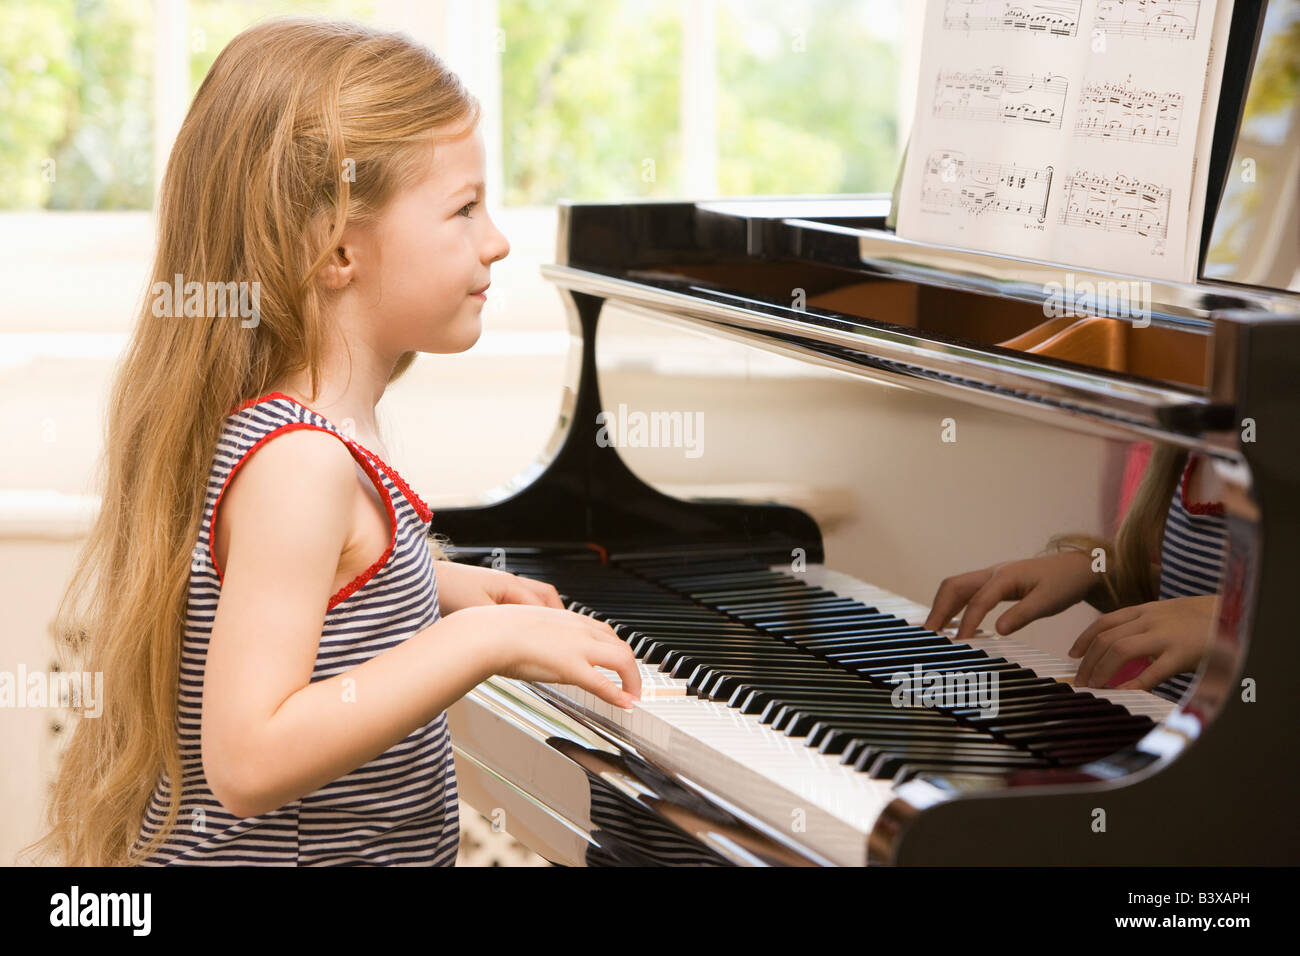 Young Girl Playing Piano Stock Photo - Alamy